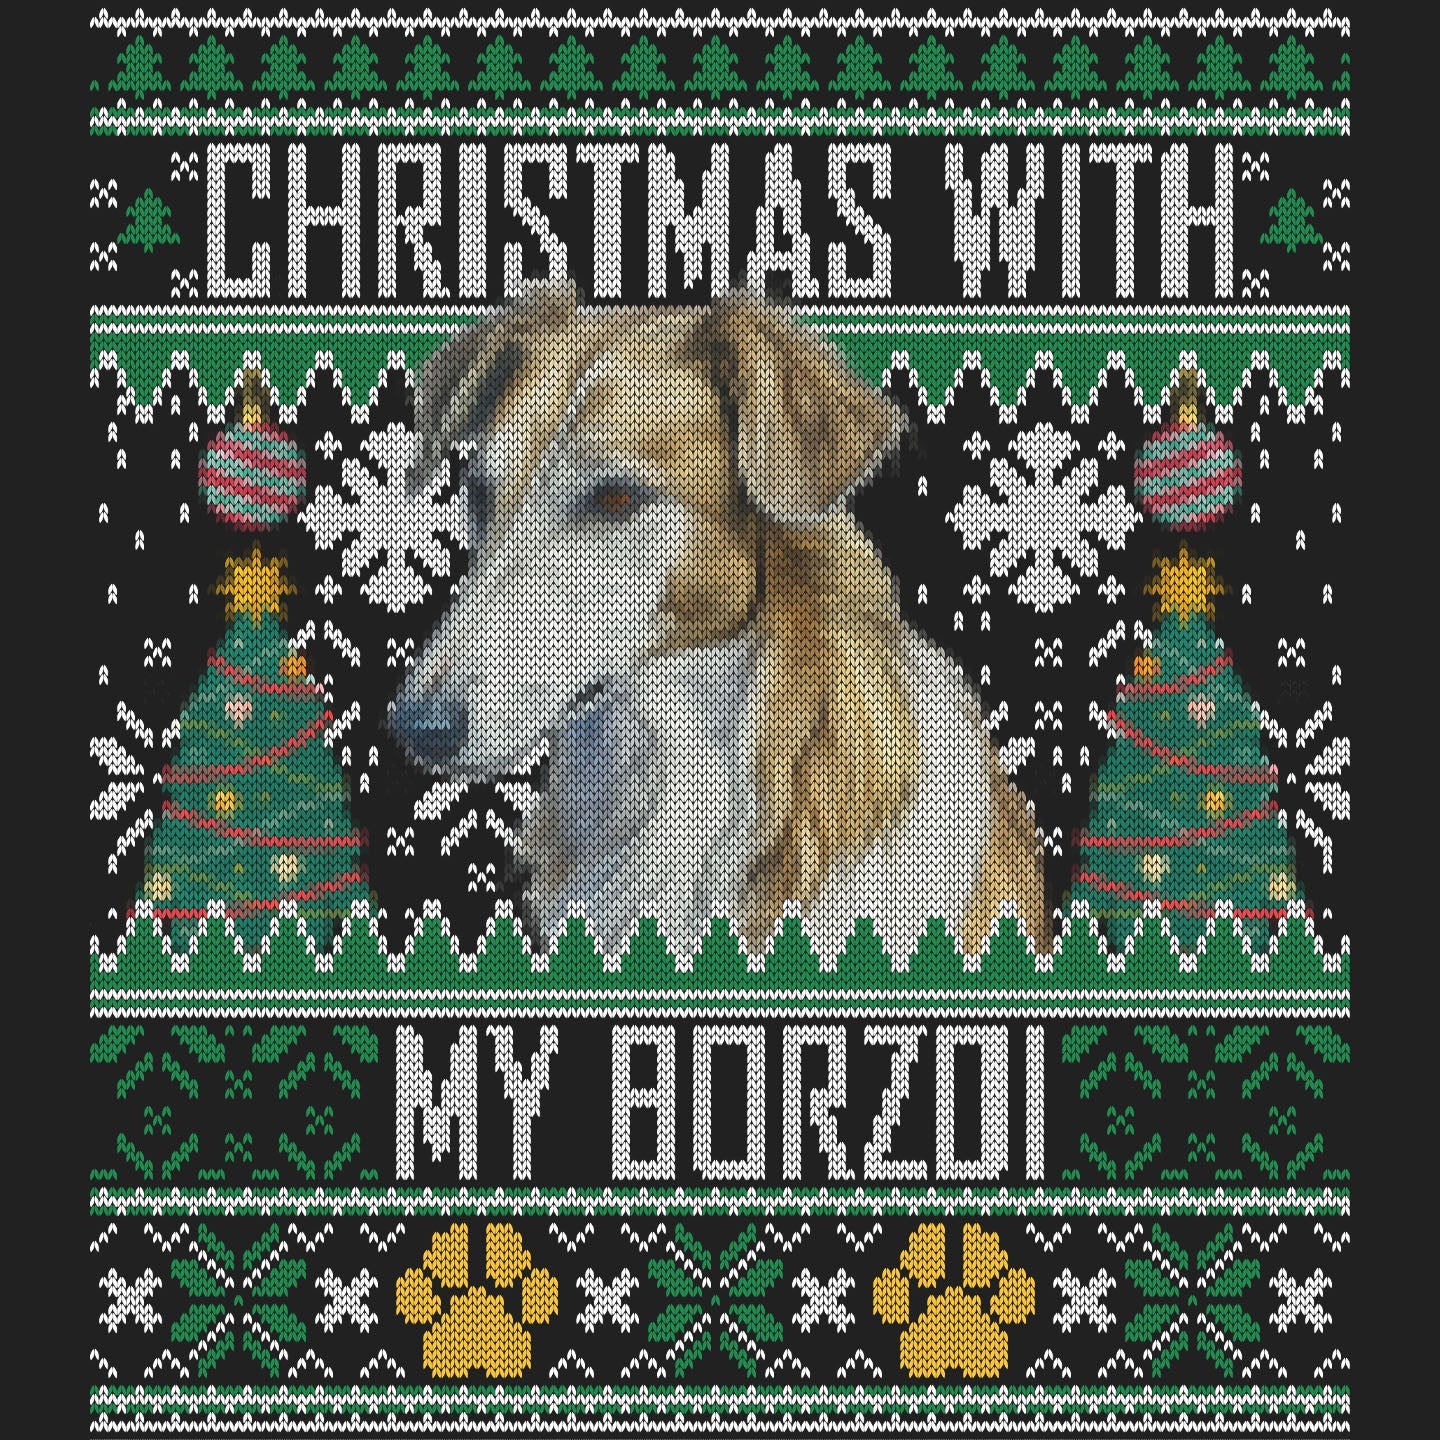 Ugly Sweater Christmas with My Borzoi - Women's V-Neck Long Sleeve T-Shirt